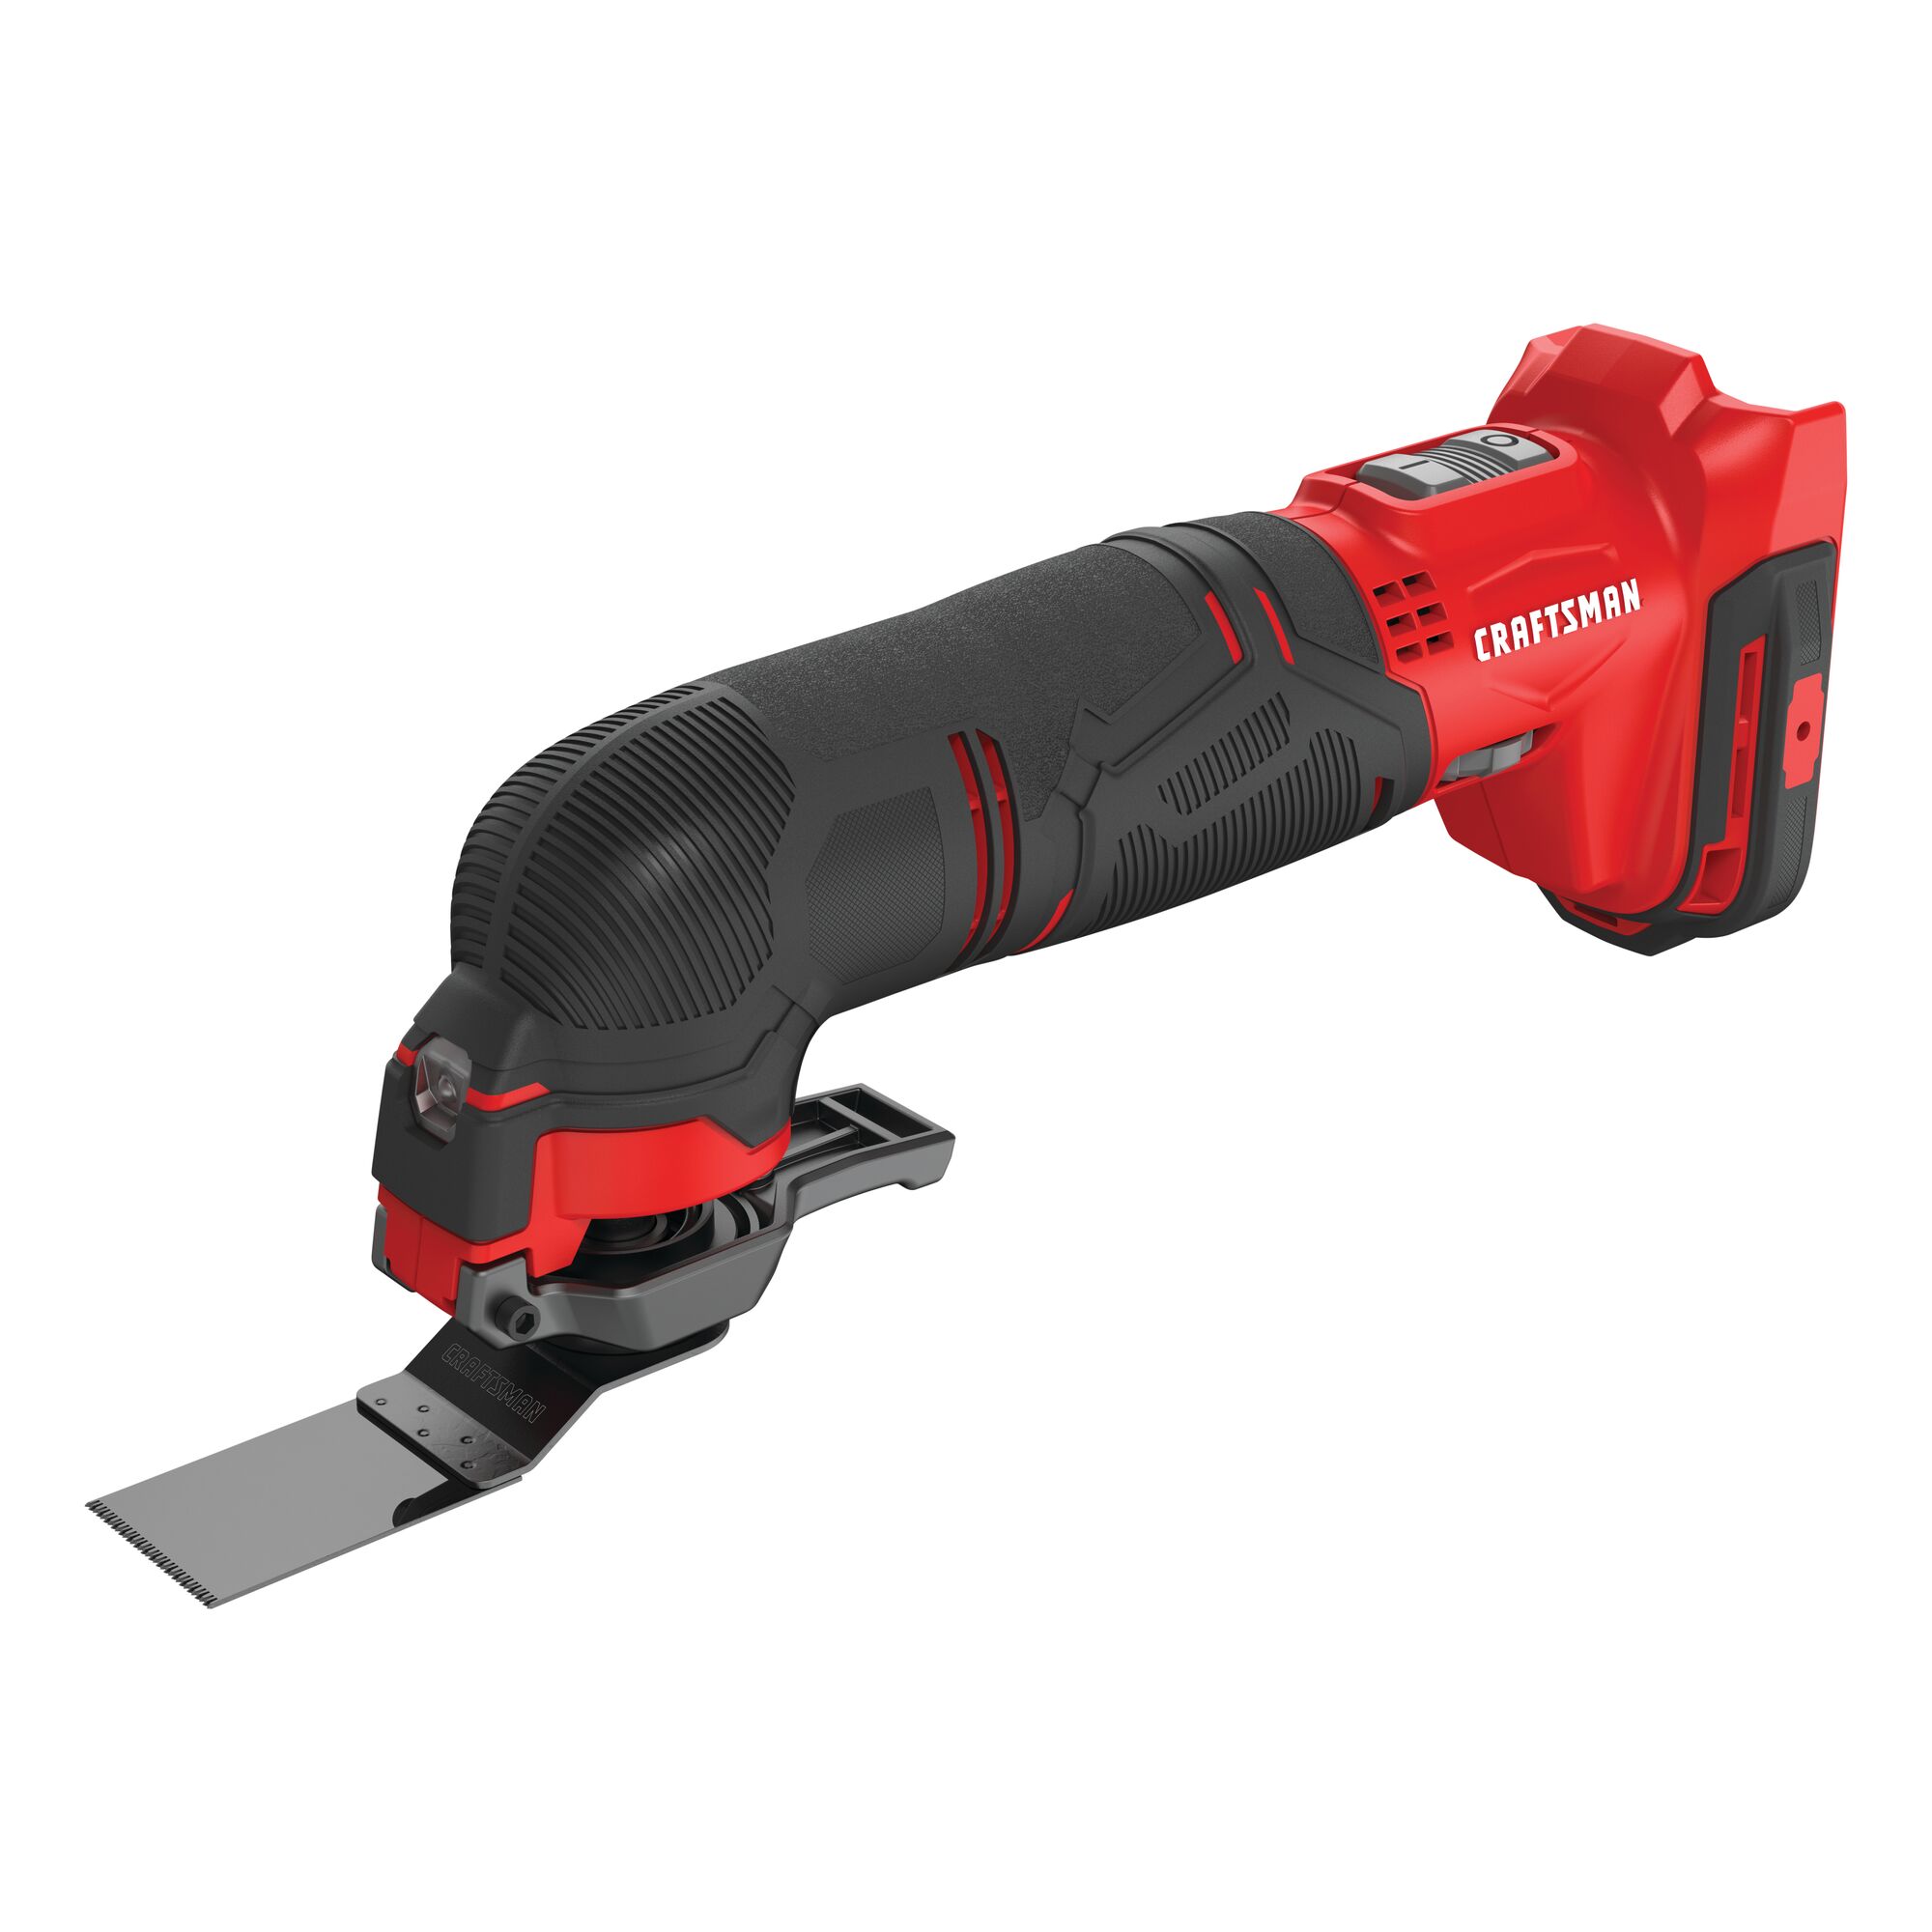 Cordless oscillating tool tool only.